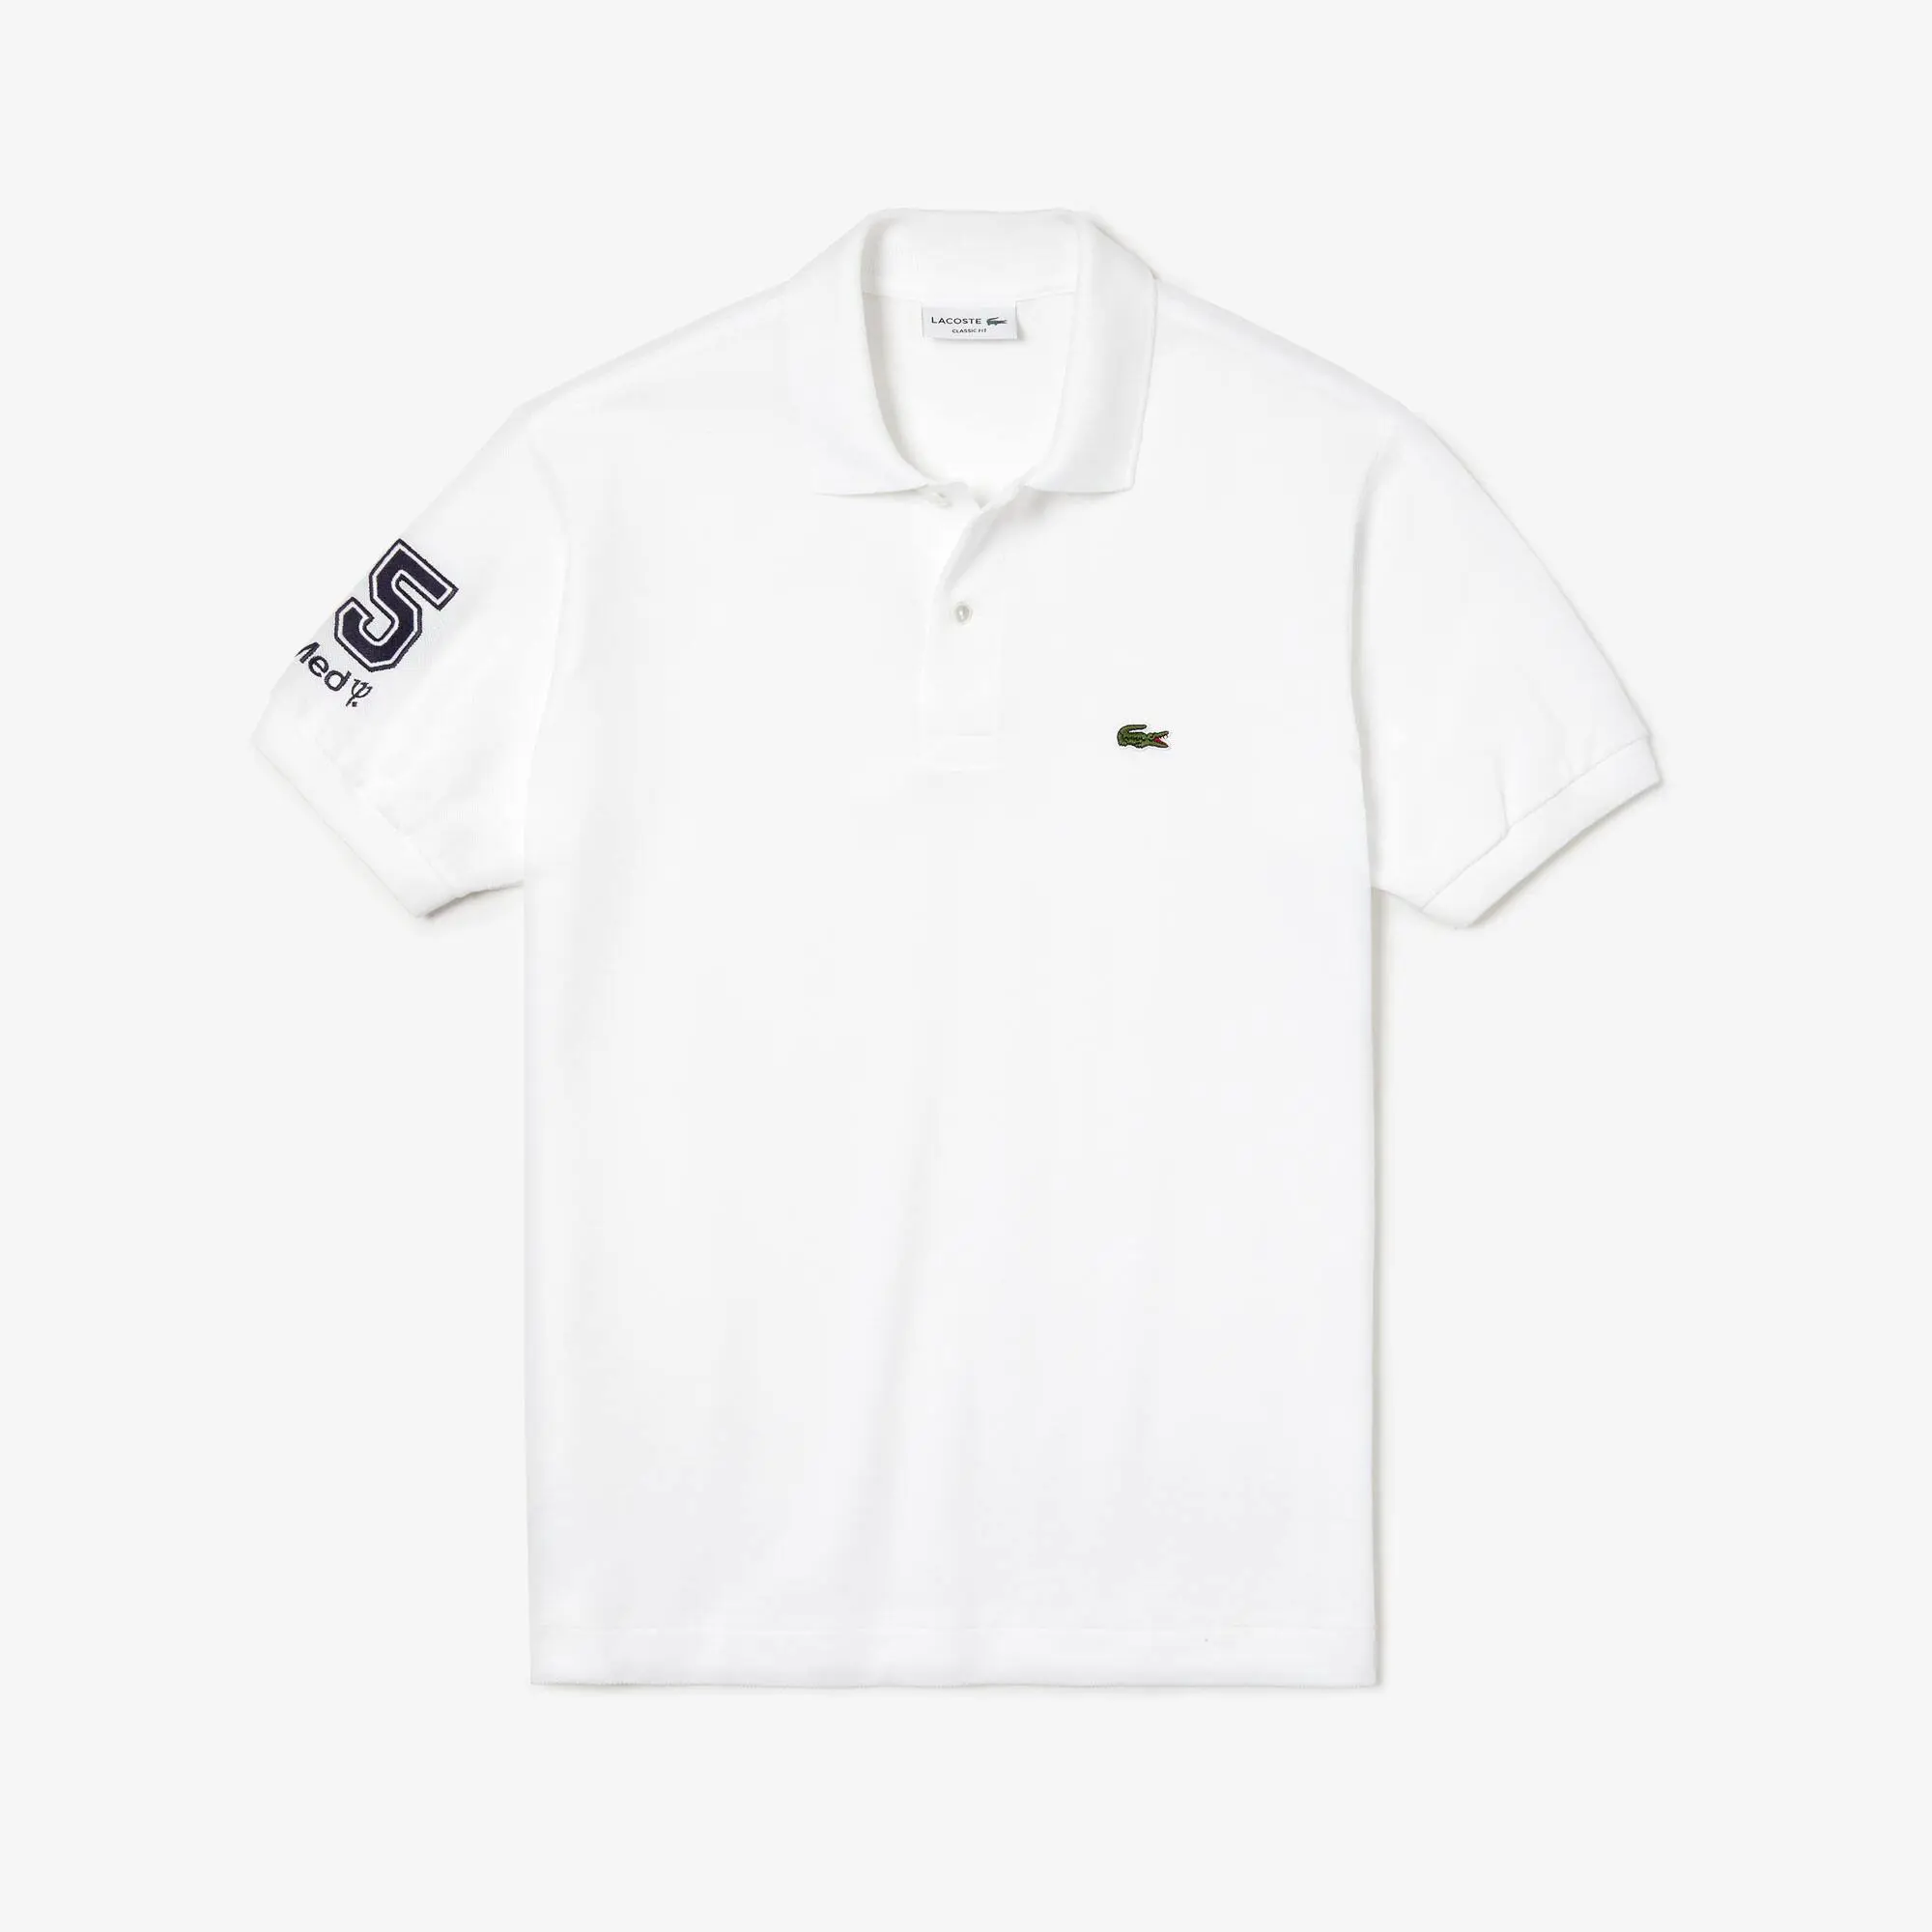 Lacoste Men's Lacoste Regular Fit Club Med Polo Shirt. 2